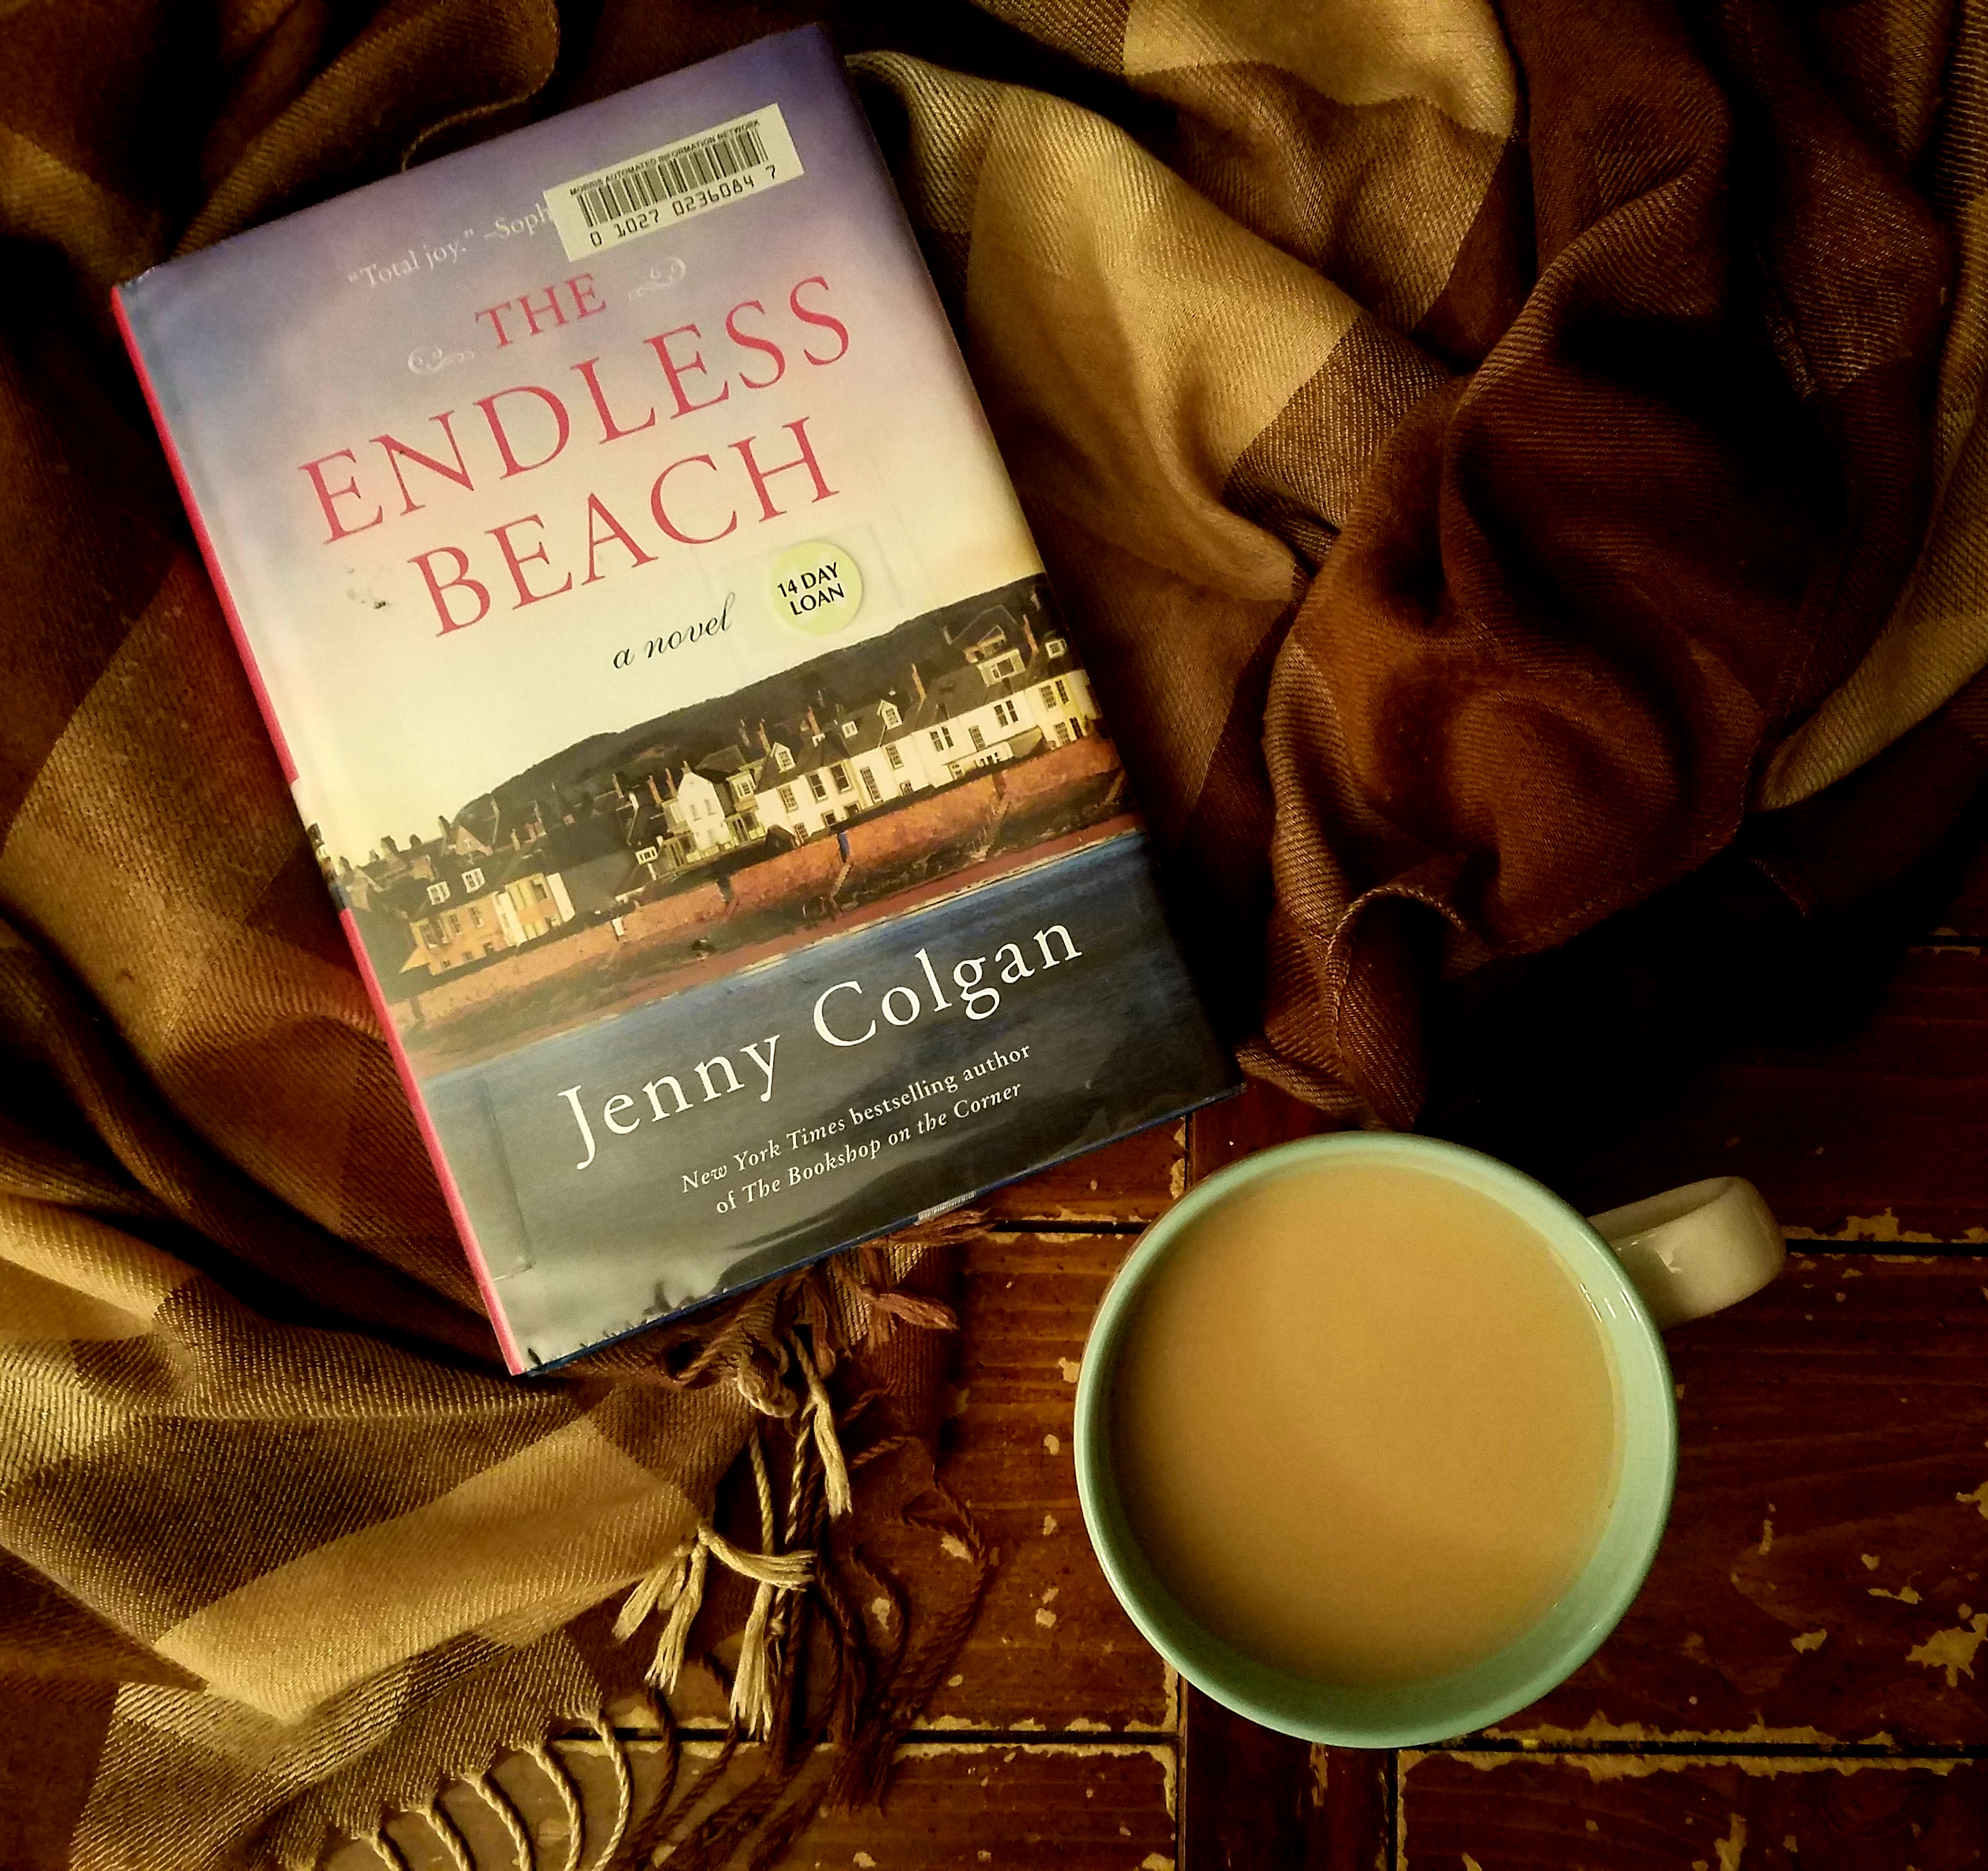 Book Review of THE ENDLESS BEACH